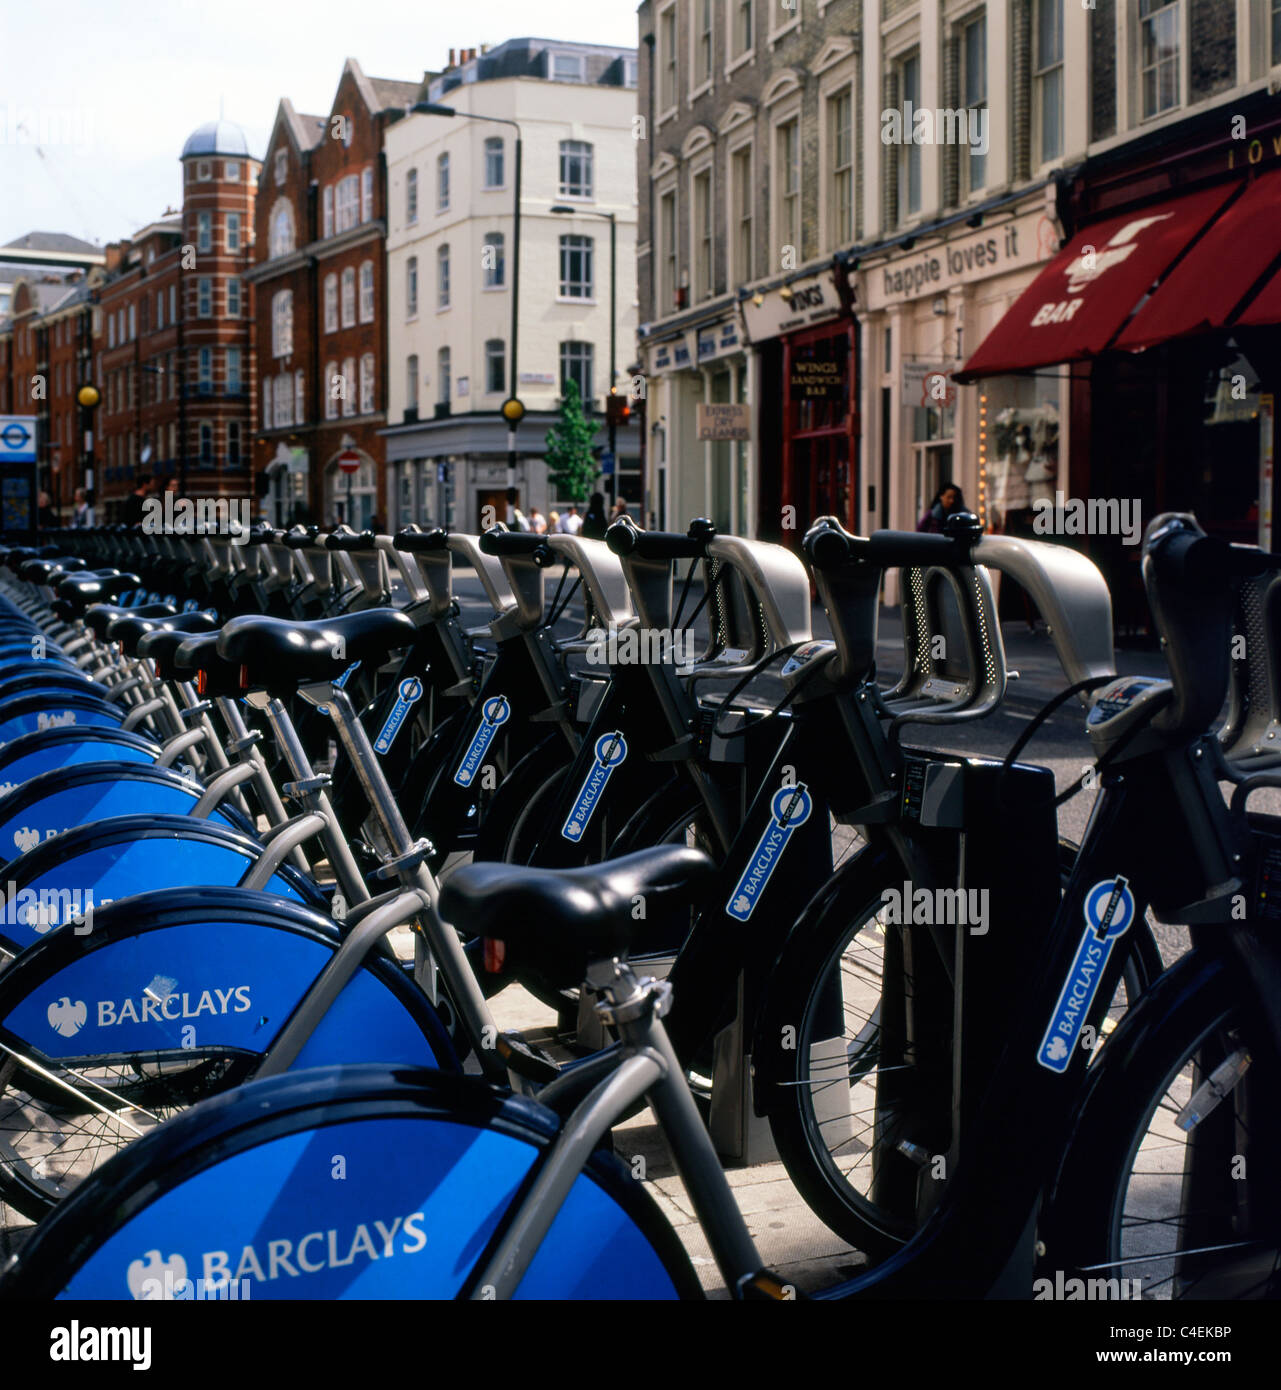 Barclays Bank sponsored hire Boris bikes lined up at a docking station on Drury Lane, Covent Garden in London UK KATHY DEWITT Stock Photo